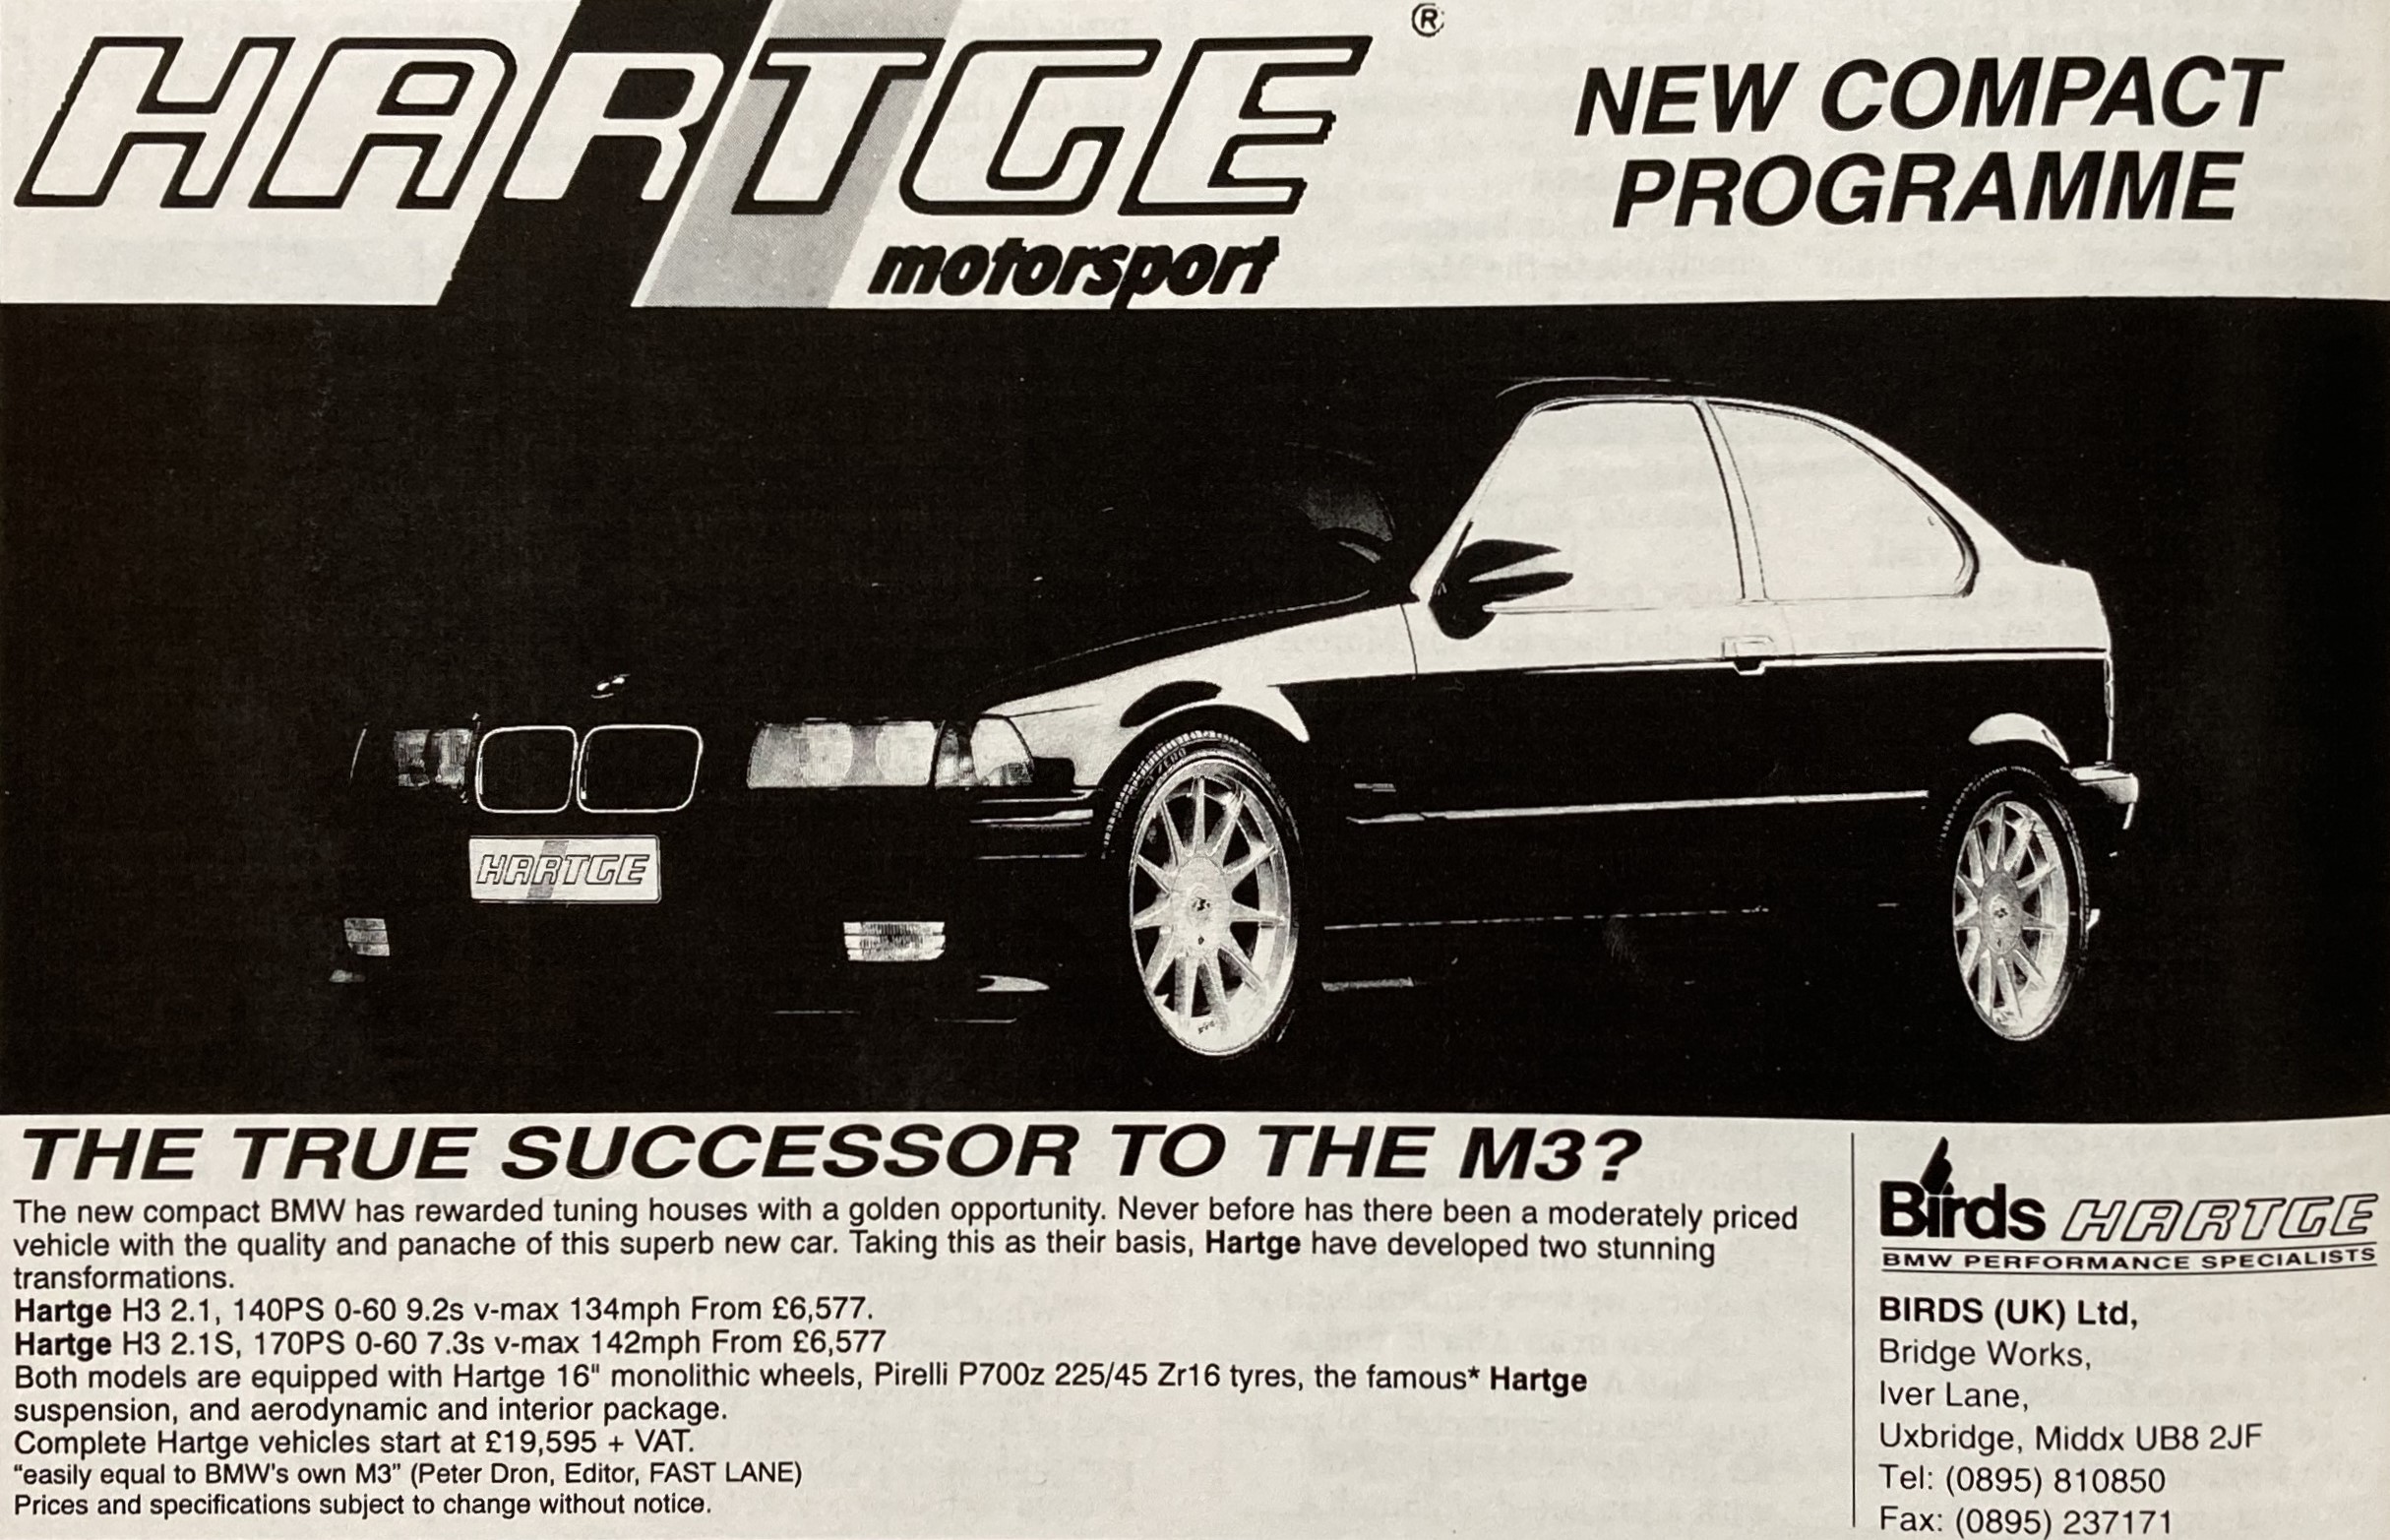 Ad Break: Hartge's BMW Compact was an E30 M3 for the 1990s